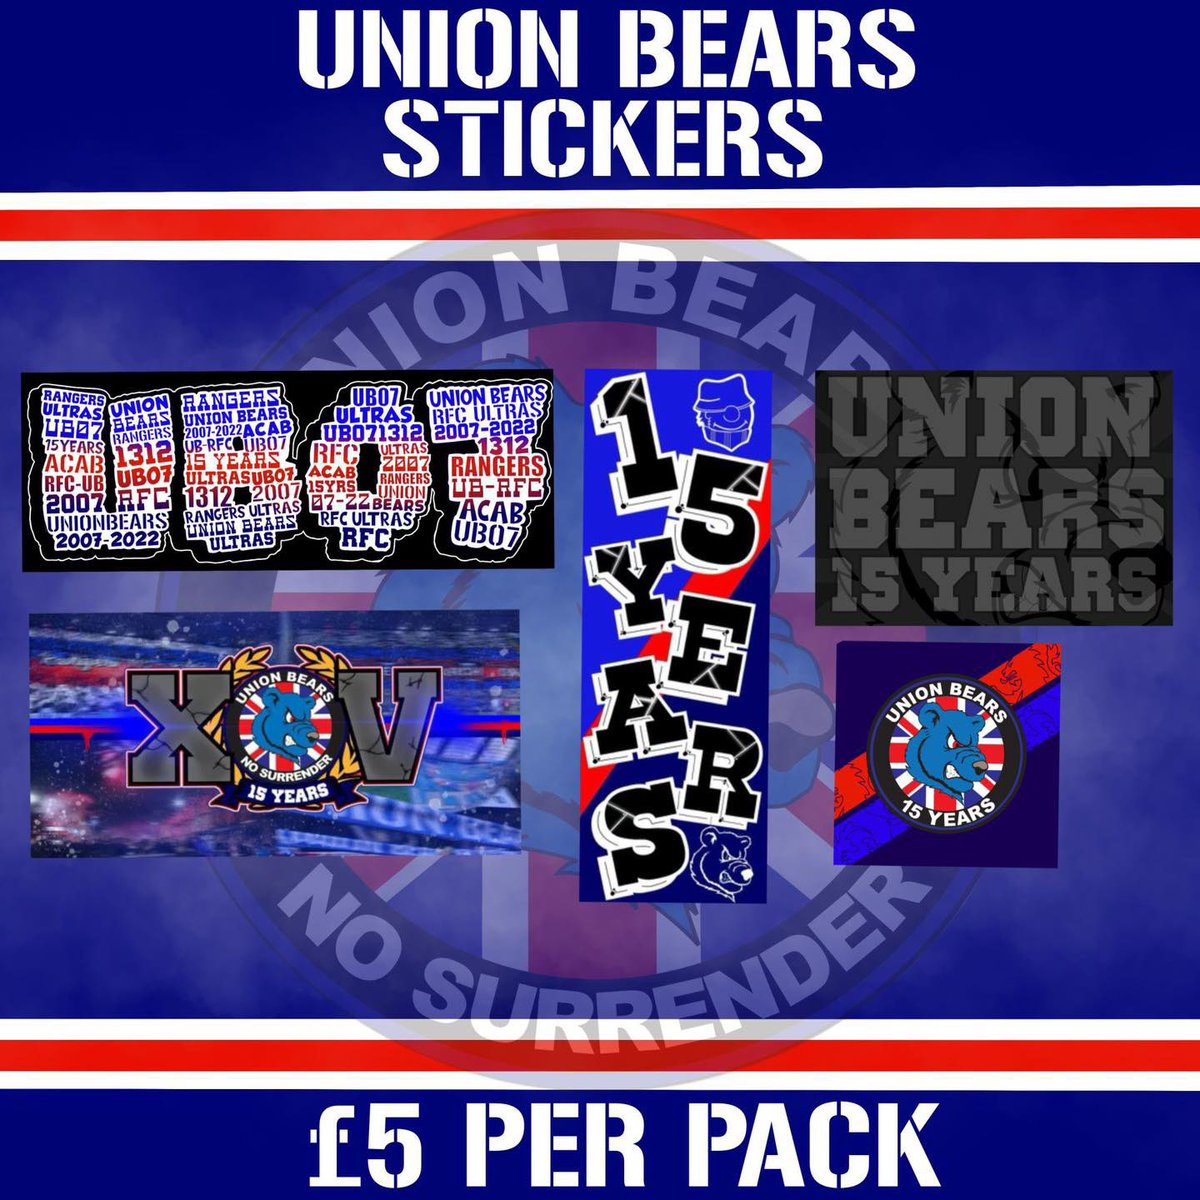 Union Bears stall will be open tonight from 6:45-7:45pm inside the Broomloan Front concourse. New sticker packs will be on sale, priced at £5. Registration and renewals for Broomloan Collective will be available. Ask at the stall for further details.